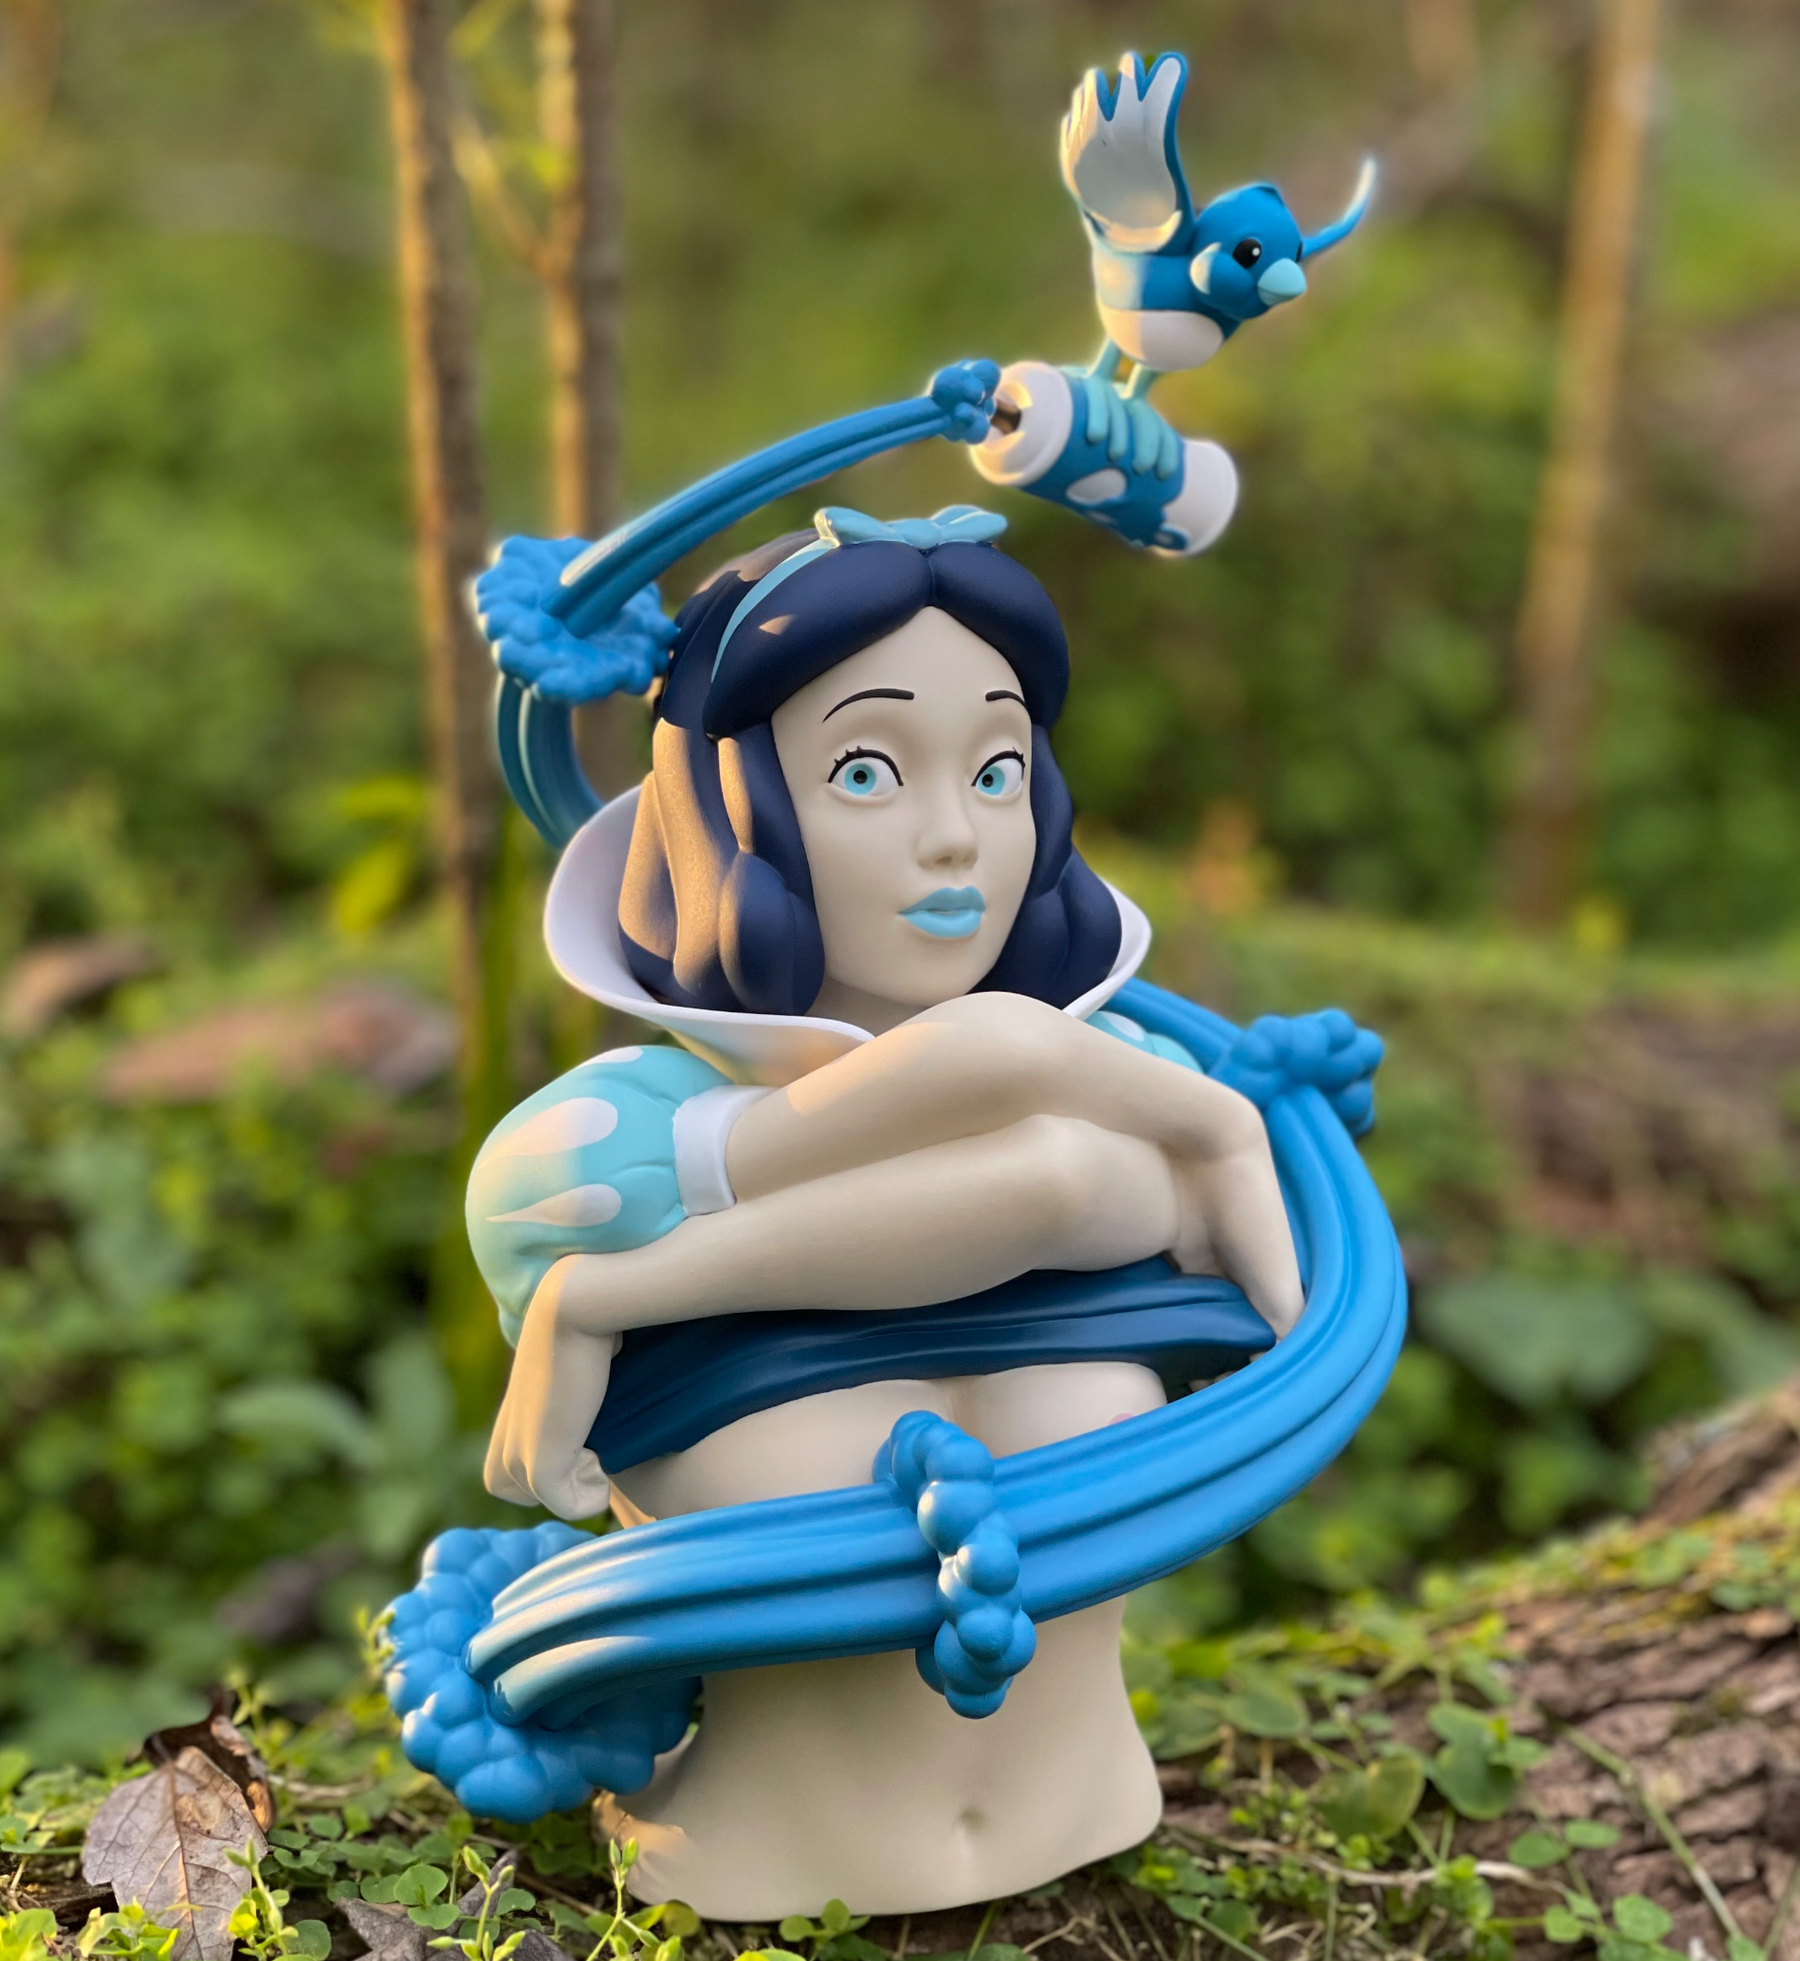 Dirty Snow Ice Blue Tenacious Exclusive 10-inch vinyl statue by Prime x Strangecat Toys Available Now